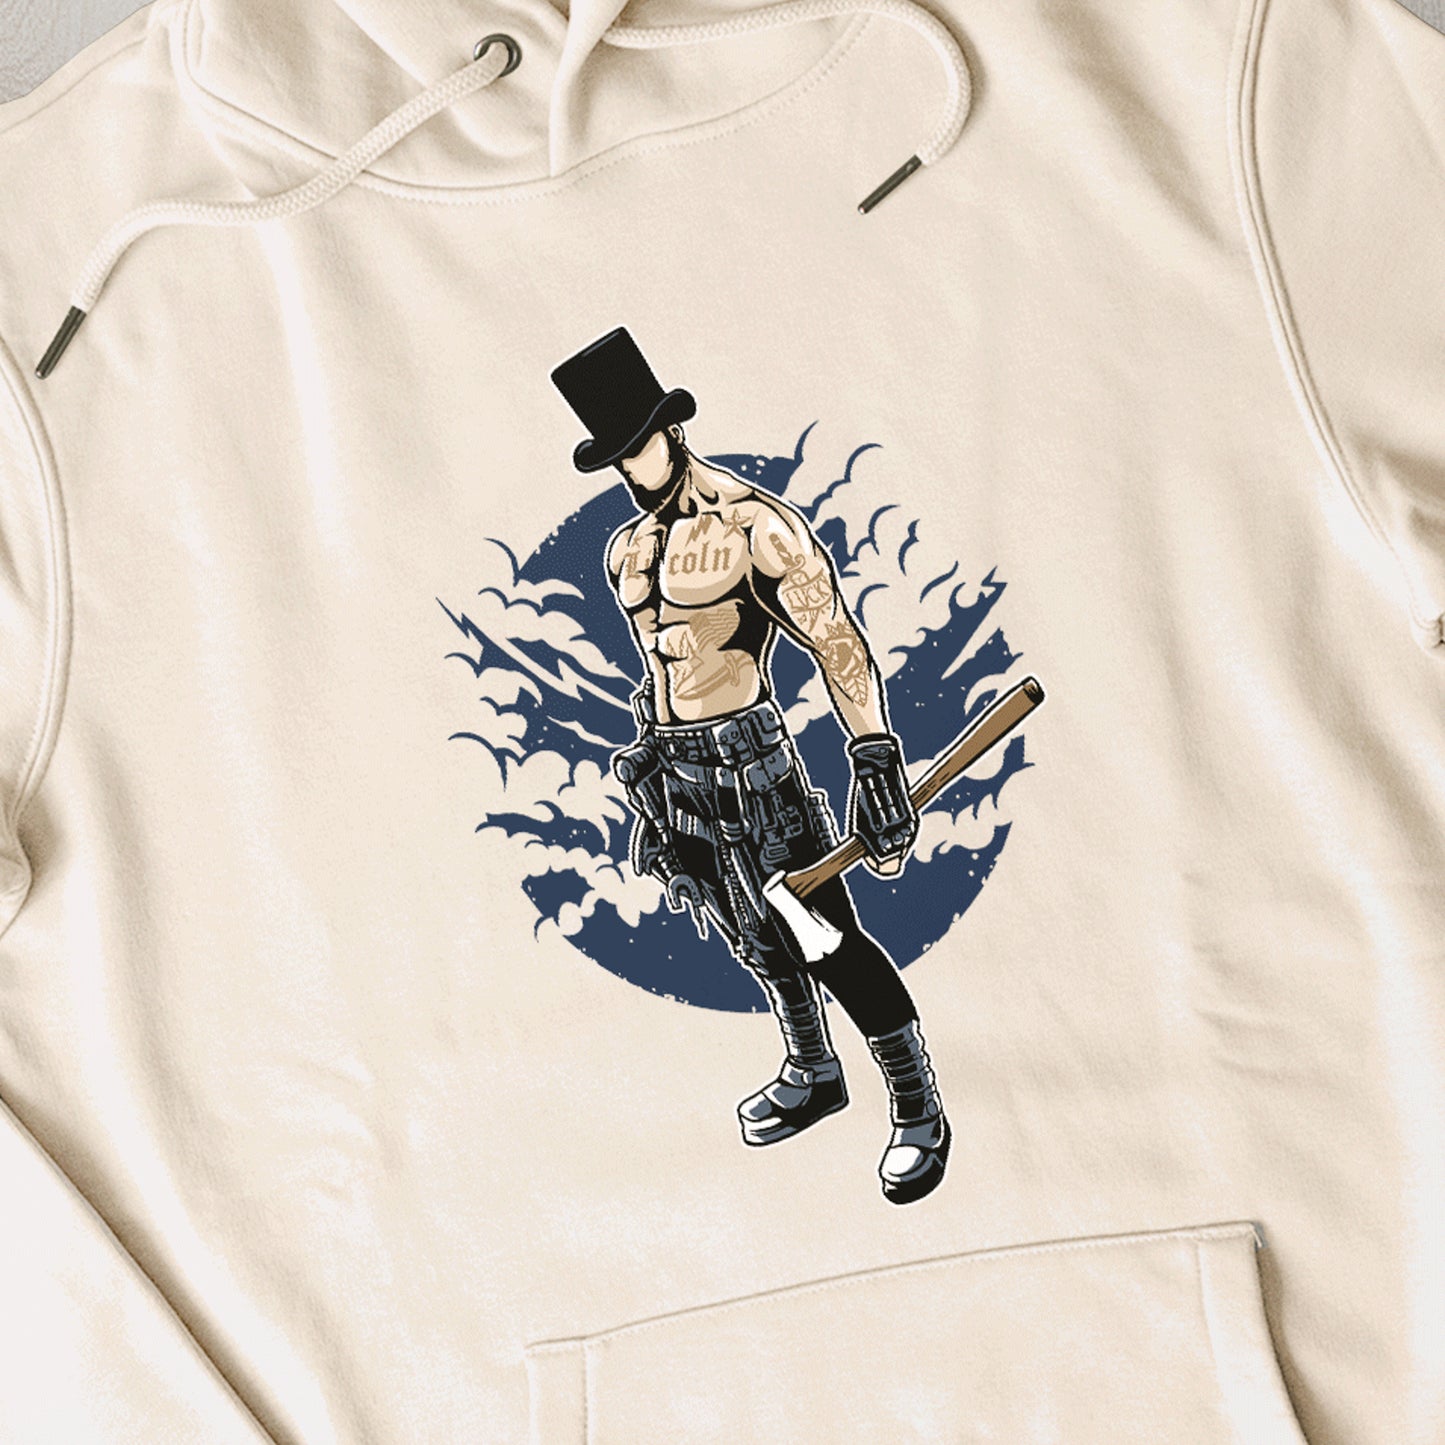 Lucky Lincoln Hoodie Premium